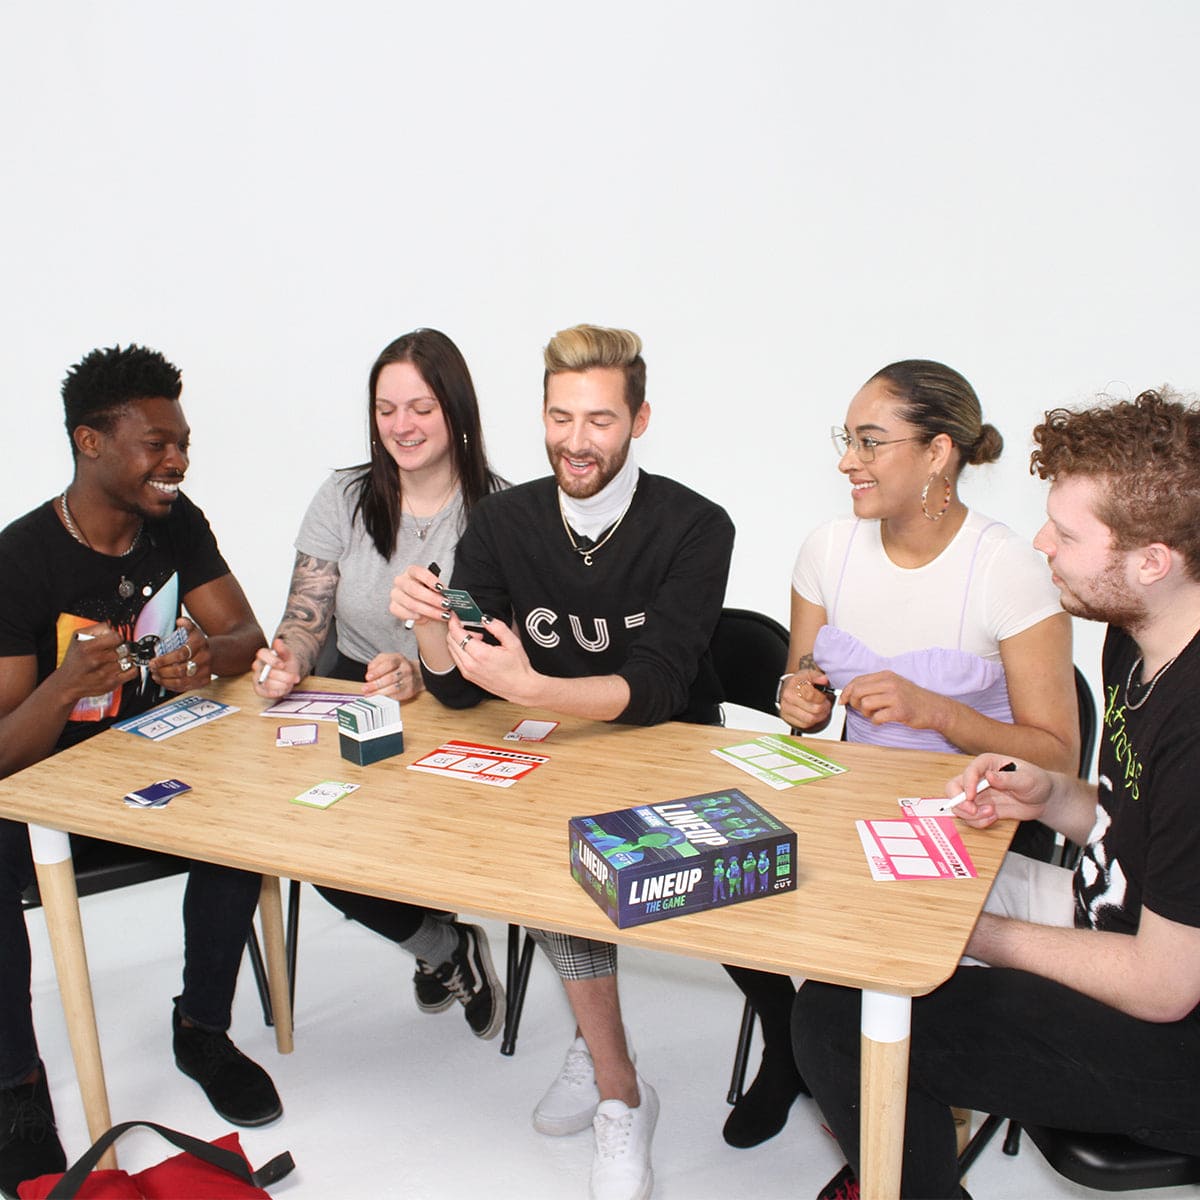  Keep IT 100: The Card Game by Cut – Surprising Surveys